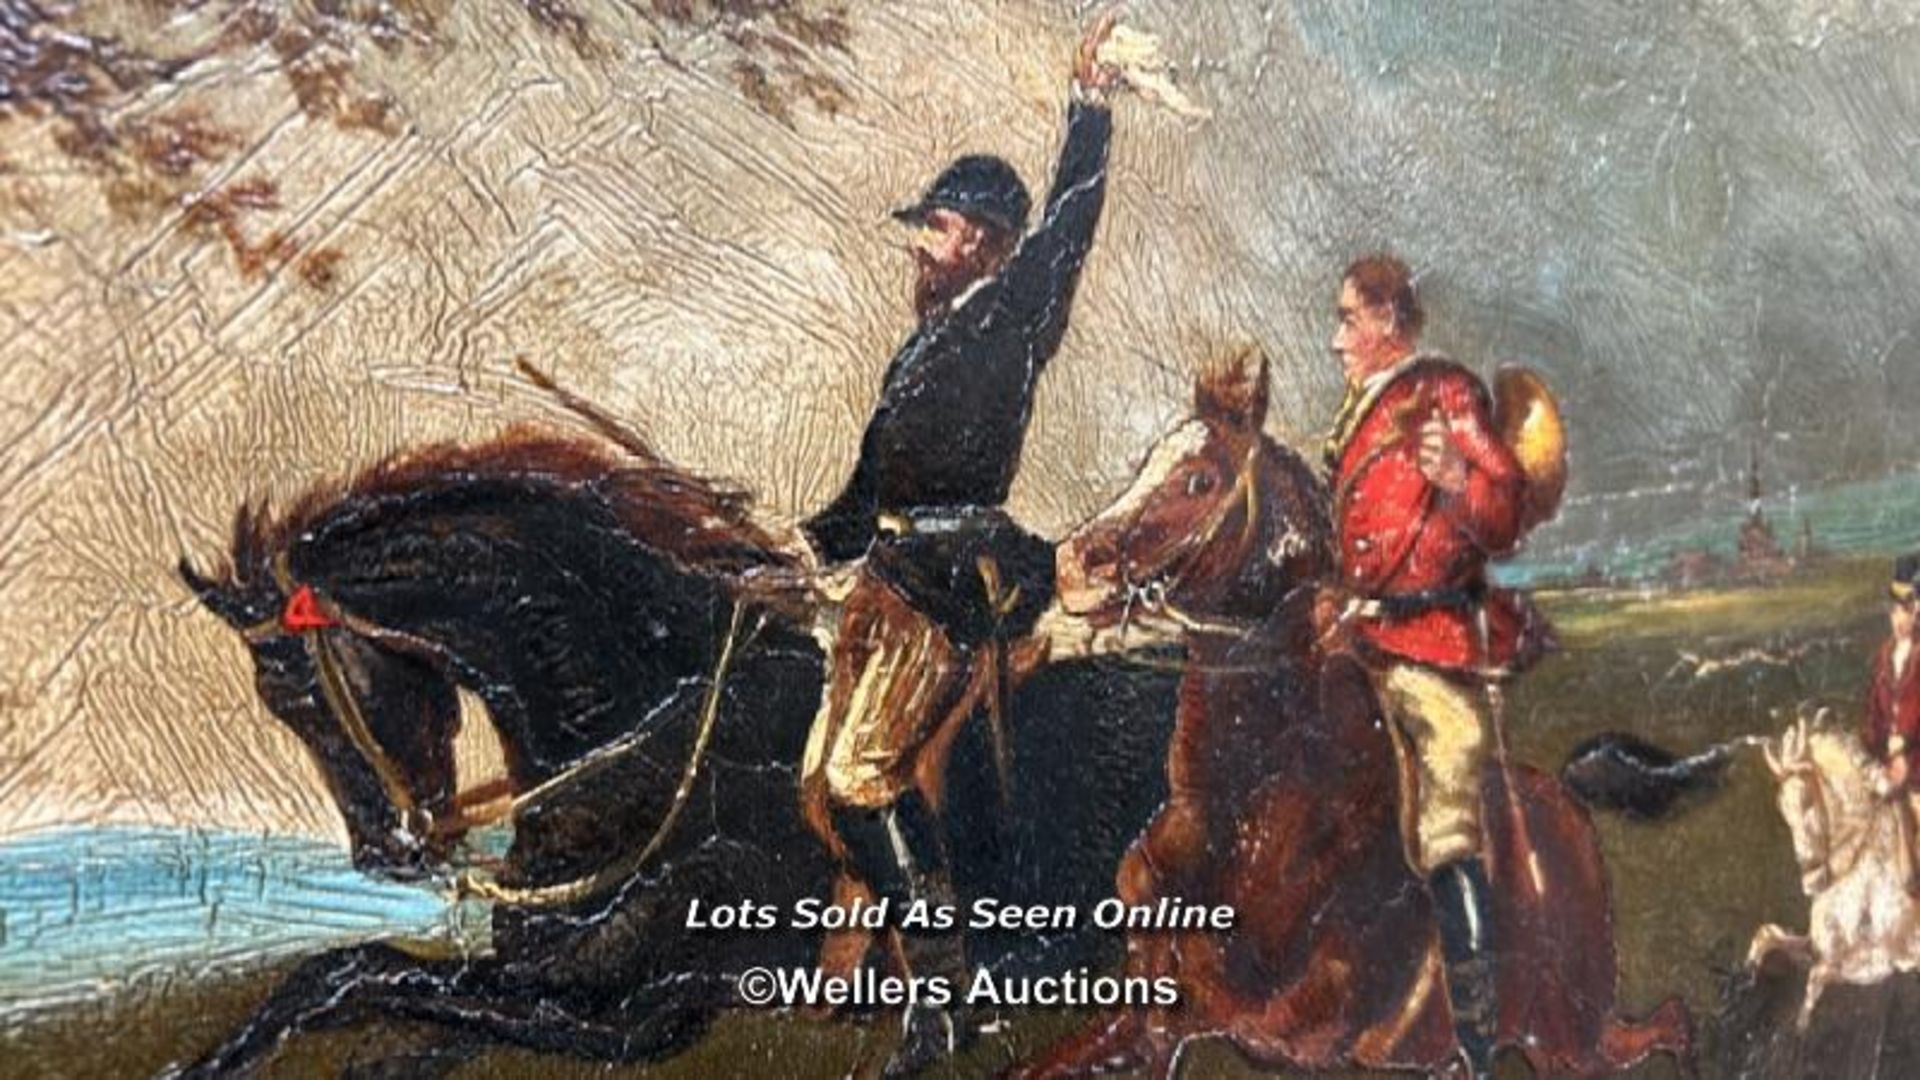 OIL PAINTING DEPICTING A HUNTING SCENE - Image 2 of 6